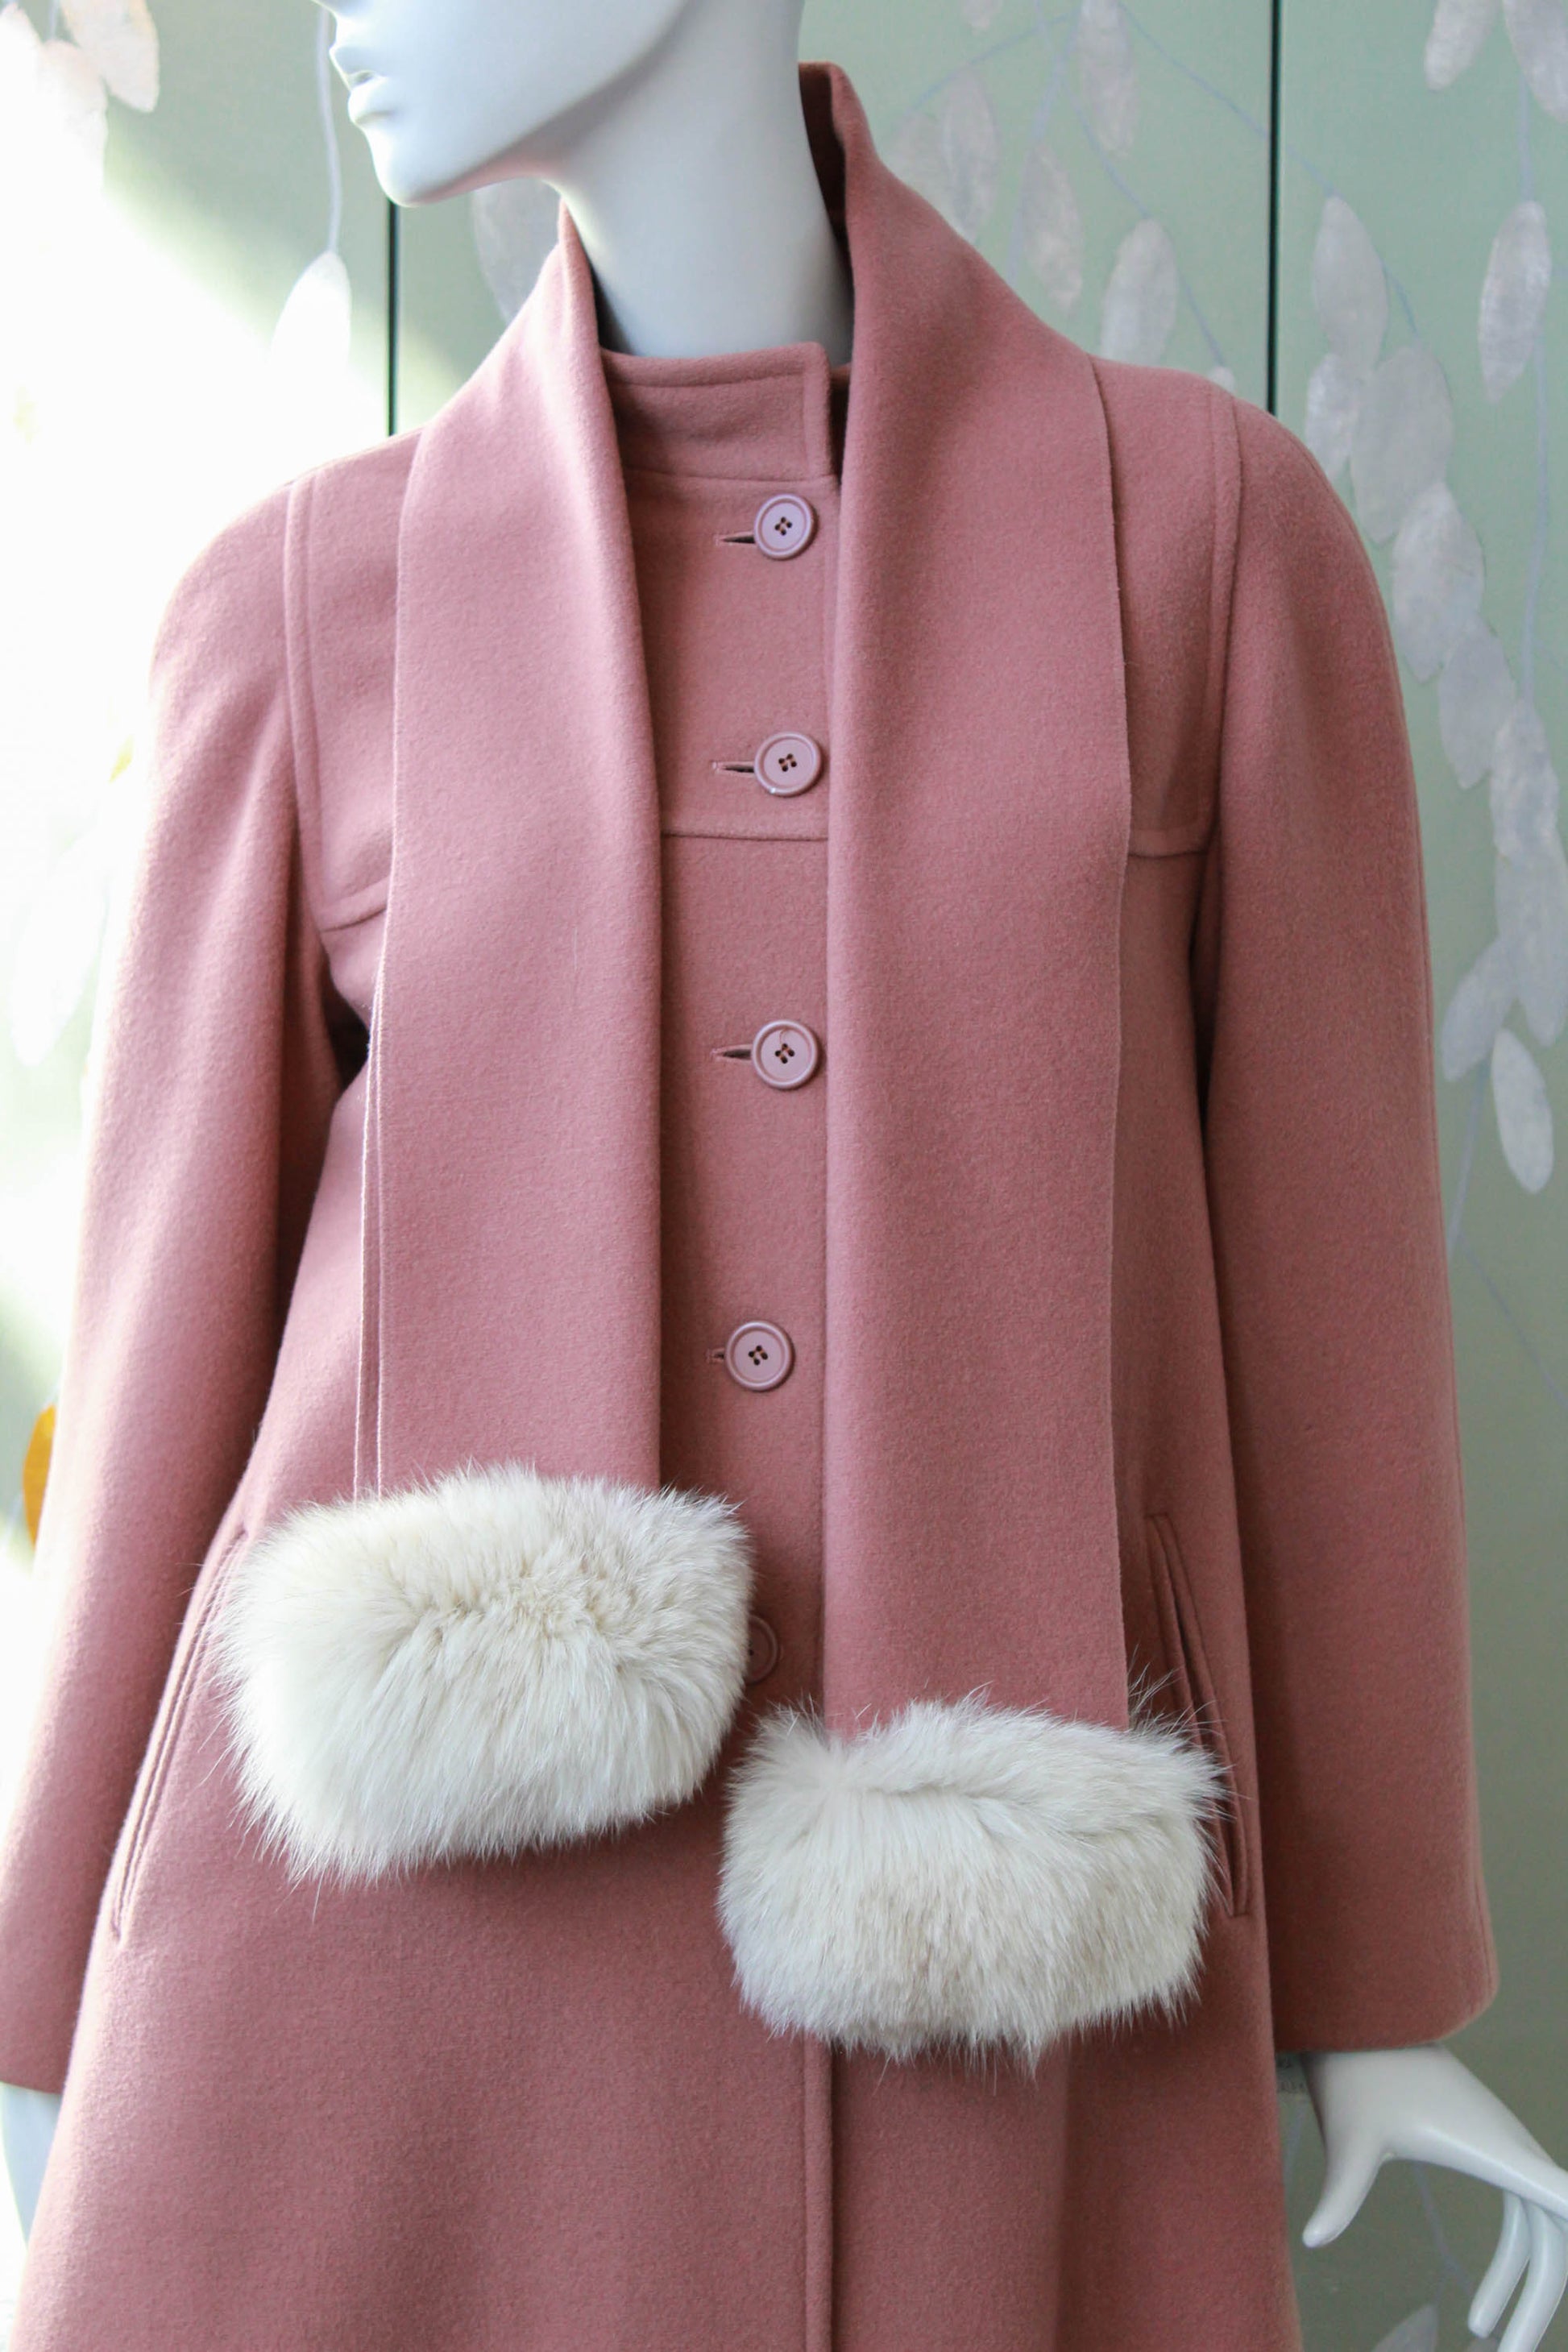 1980s rose pink wool coat with matching scarf vintage Hannah Coats Collection Minimalist Winter Coat Vintage